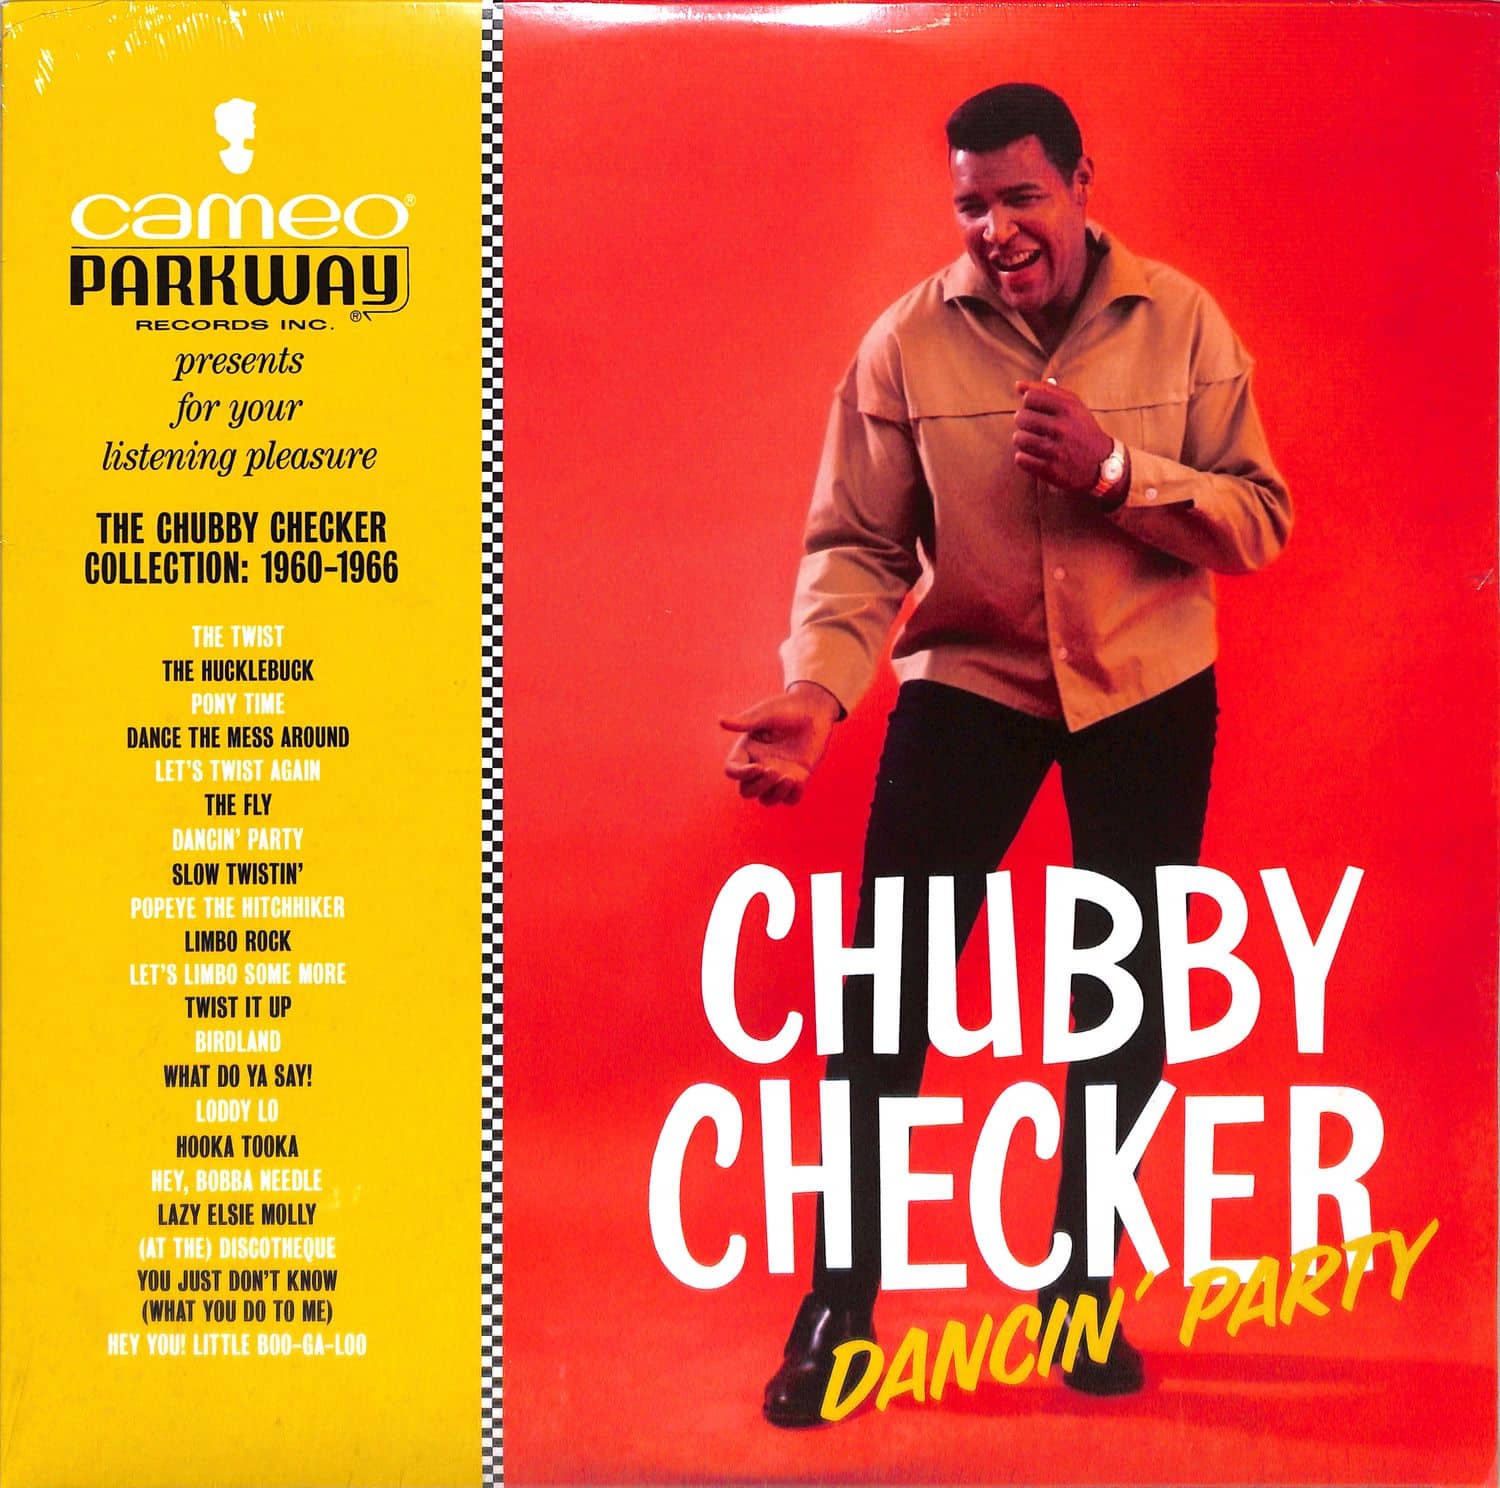 Chubby Checker - DANCIN PARTY: THE CHUBBY CHECKER COLLECTION 